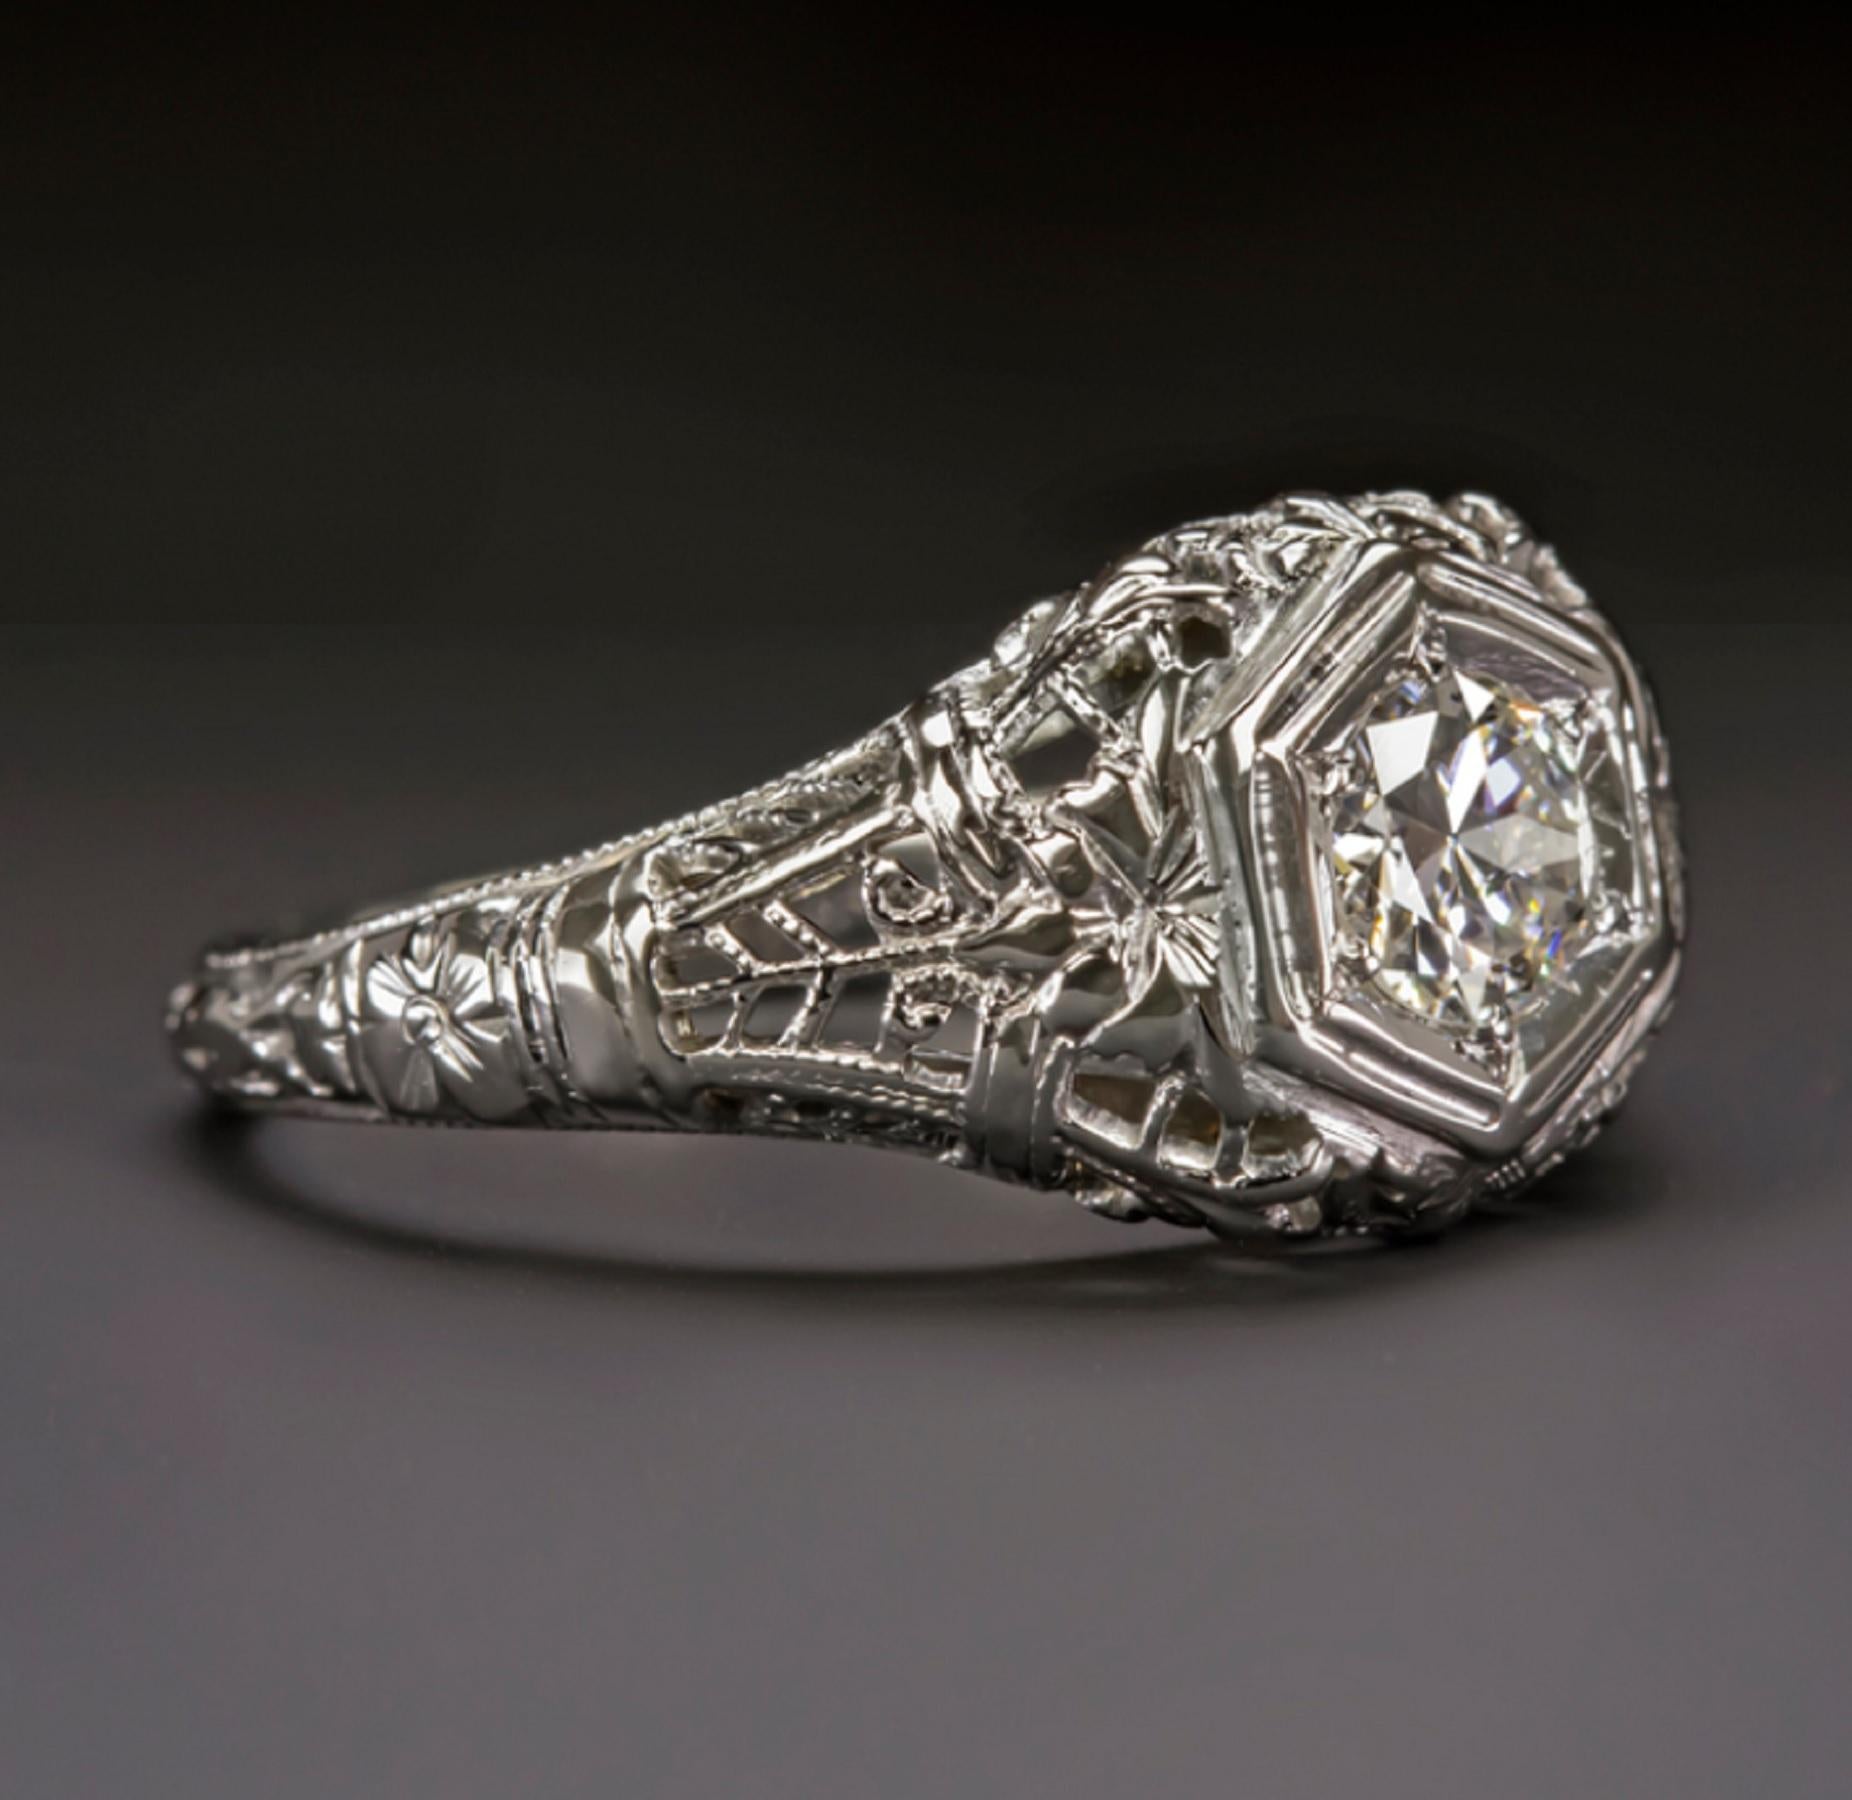 An original vintage ring showcases a lively old European cut diamond accented with intricate filigree and richly textured hand engraving. 

The workmanship on the ring is amazing and a perfect compliment to the high quality center diamond. The hand